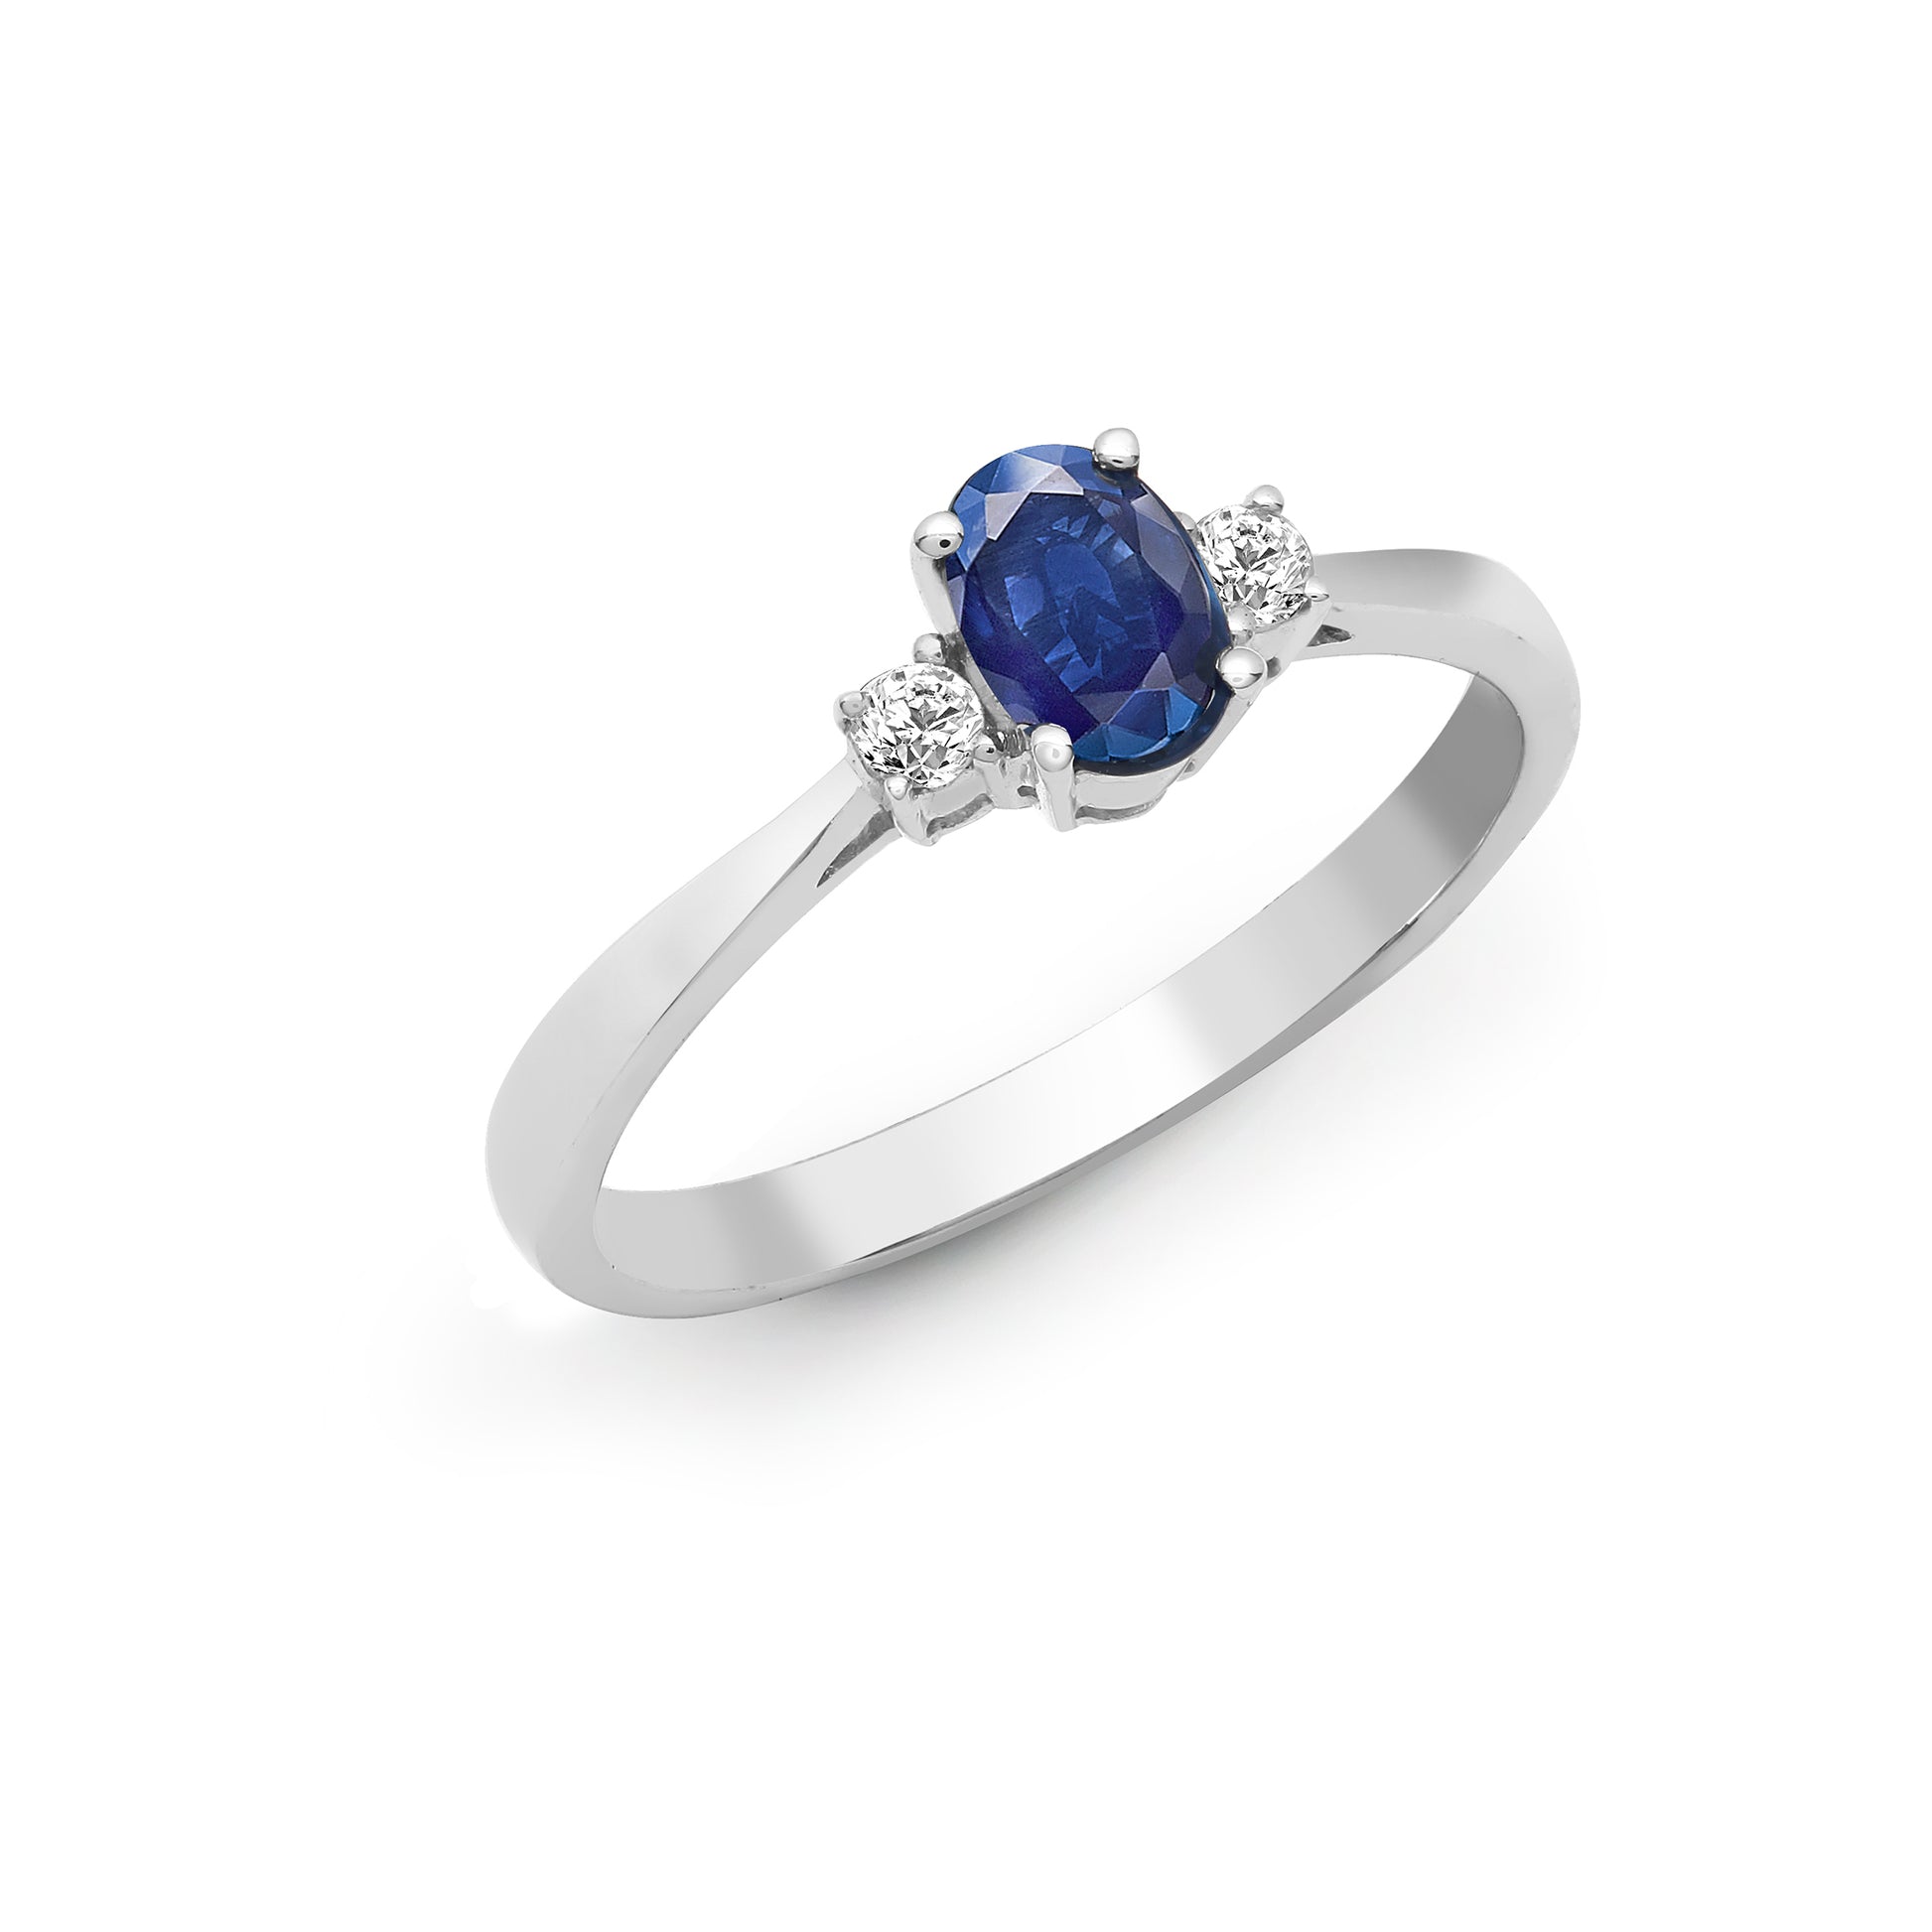 18ct White Gold  Diamond Blue Sapphire Trilogy Engagement Ring 6mm - 18R629